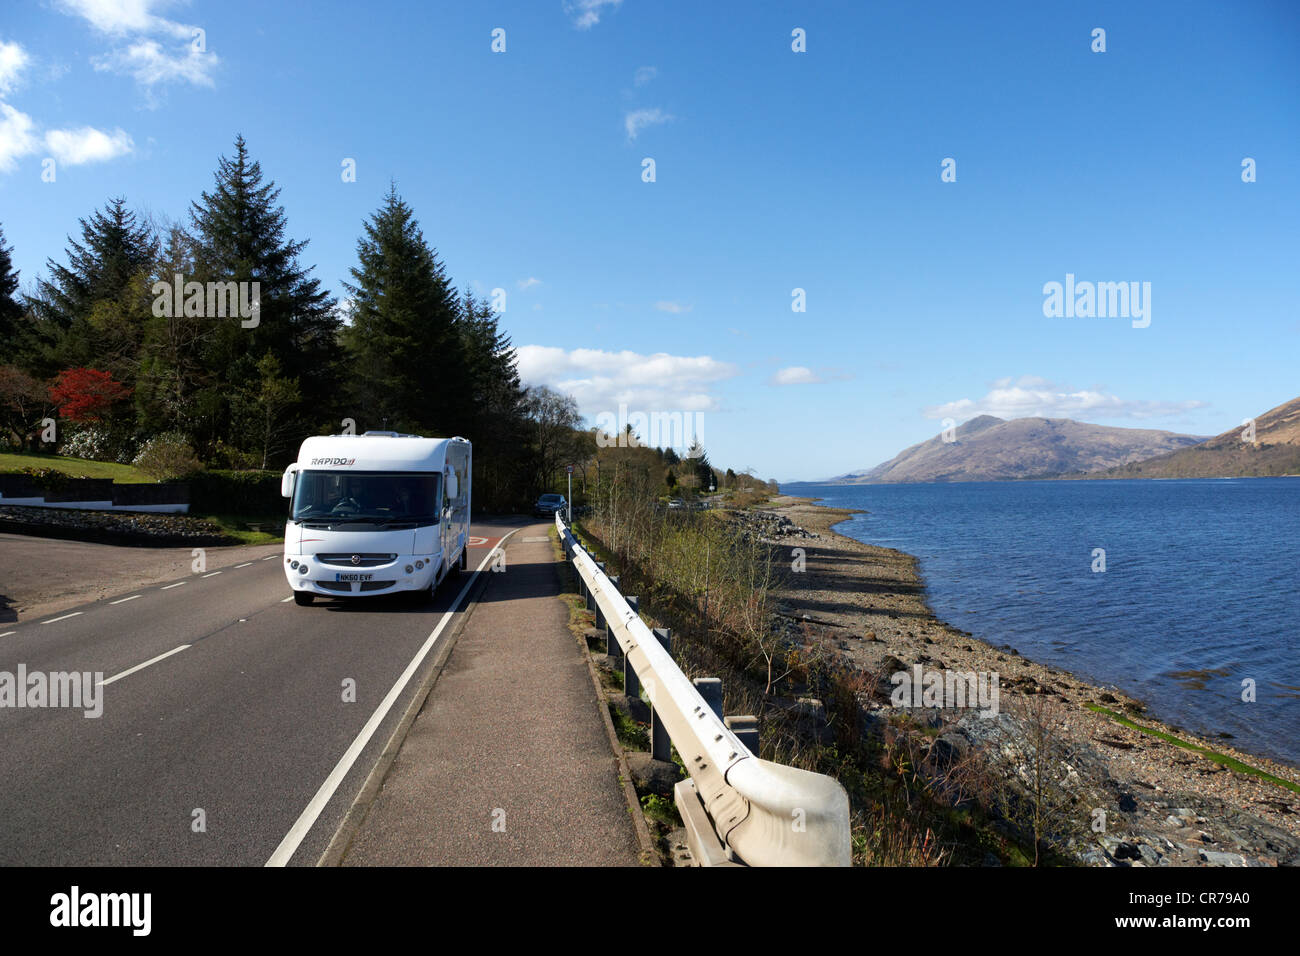 main a82 tourist route road along the shores of loch linnhe near fort william highland highlands scotland uk Stock Photo